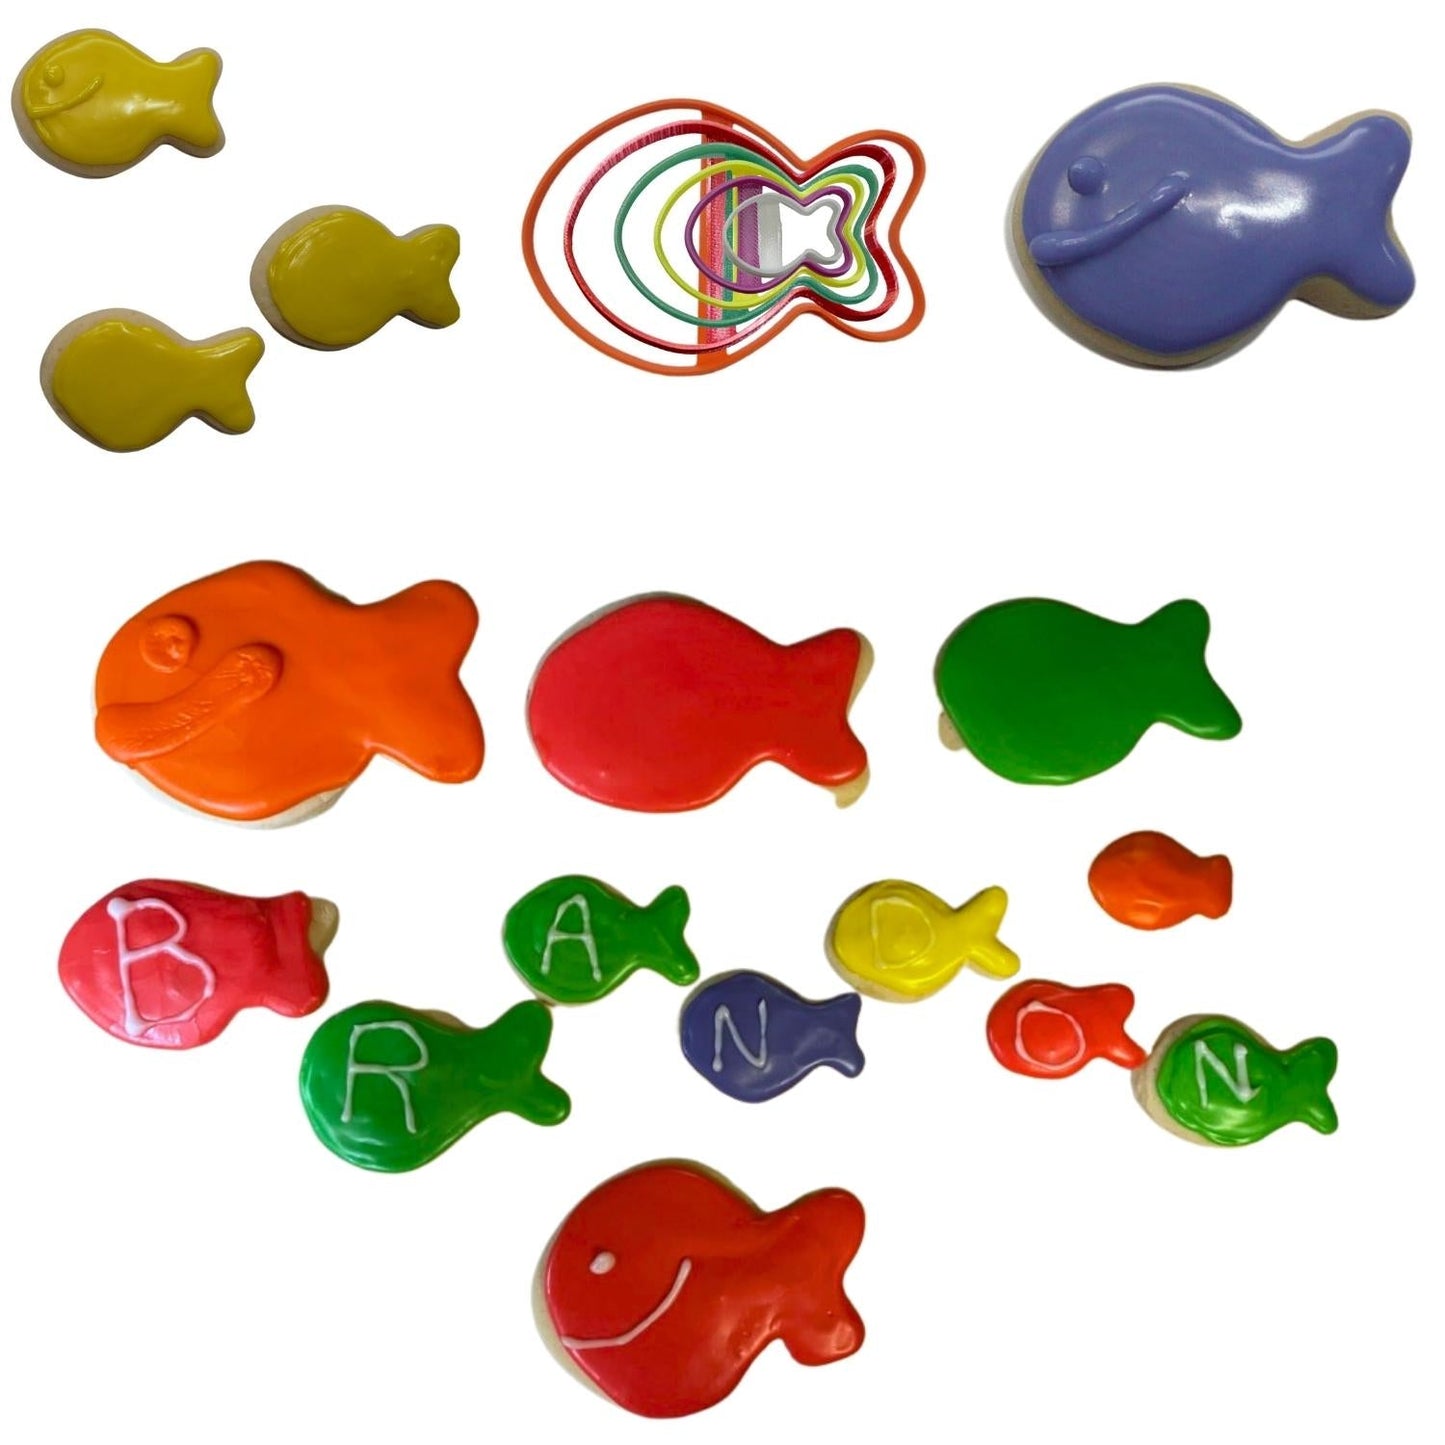 Goldfish Cracker Multi Size 1.5 IN - 4 IN Set of 6 Cookie Cutters USA PR1793